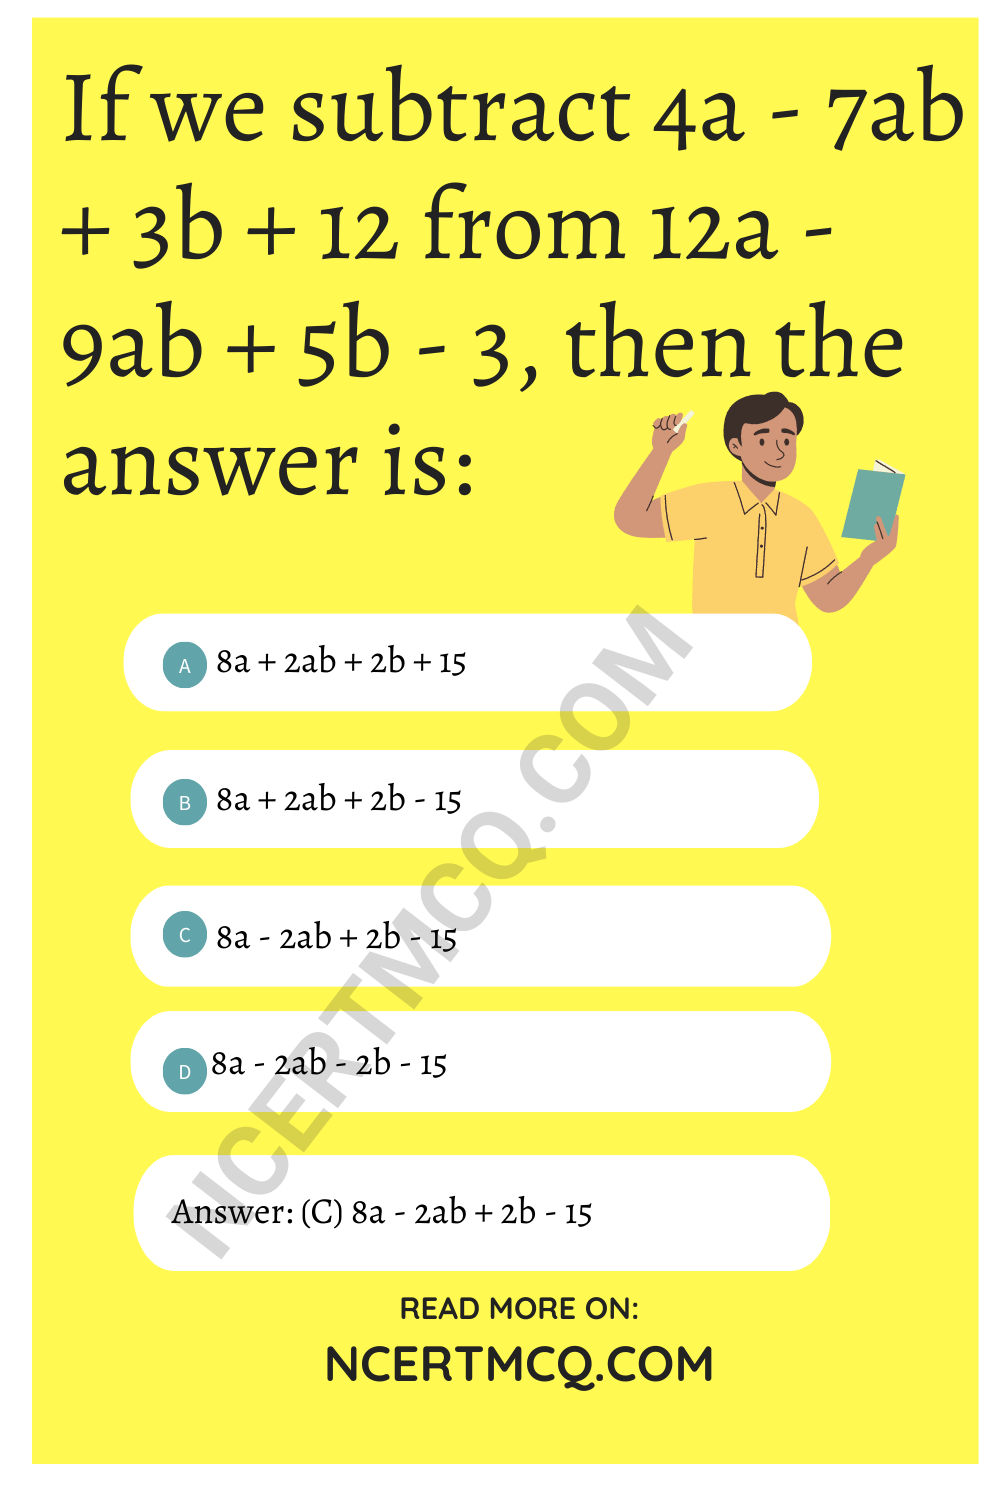 If we subtract 4a - 7ab + 3b + 12 from 12a - 9ab + 5b - 3, then the answer is: